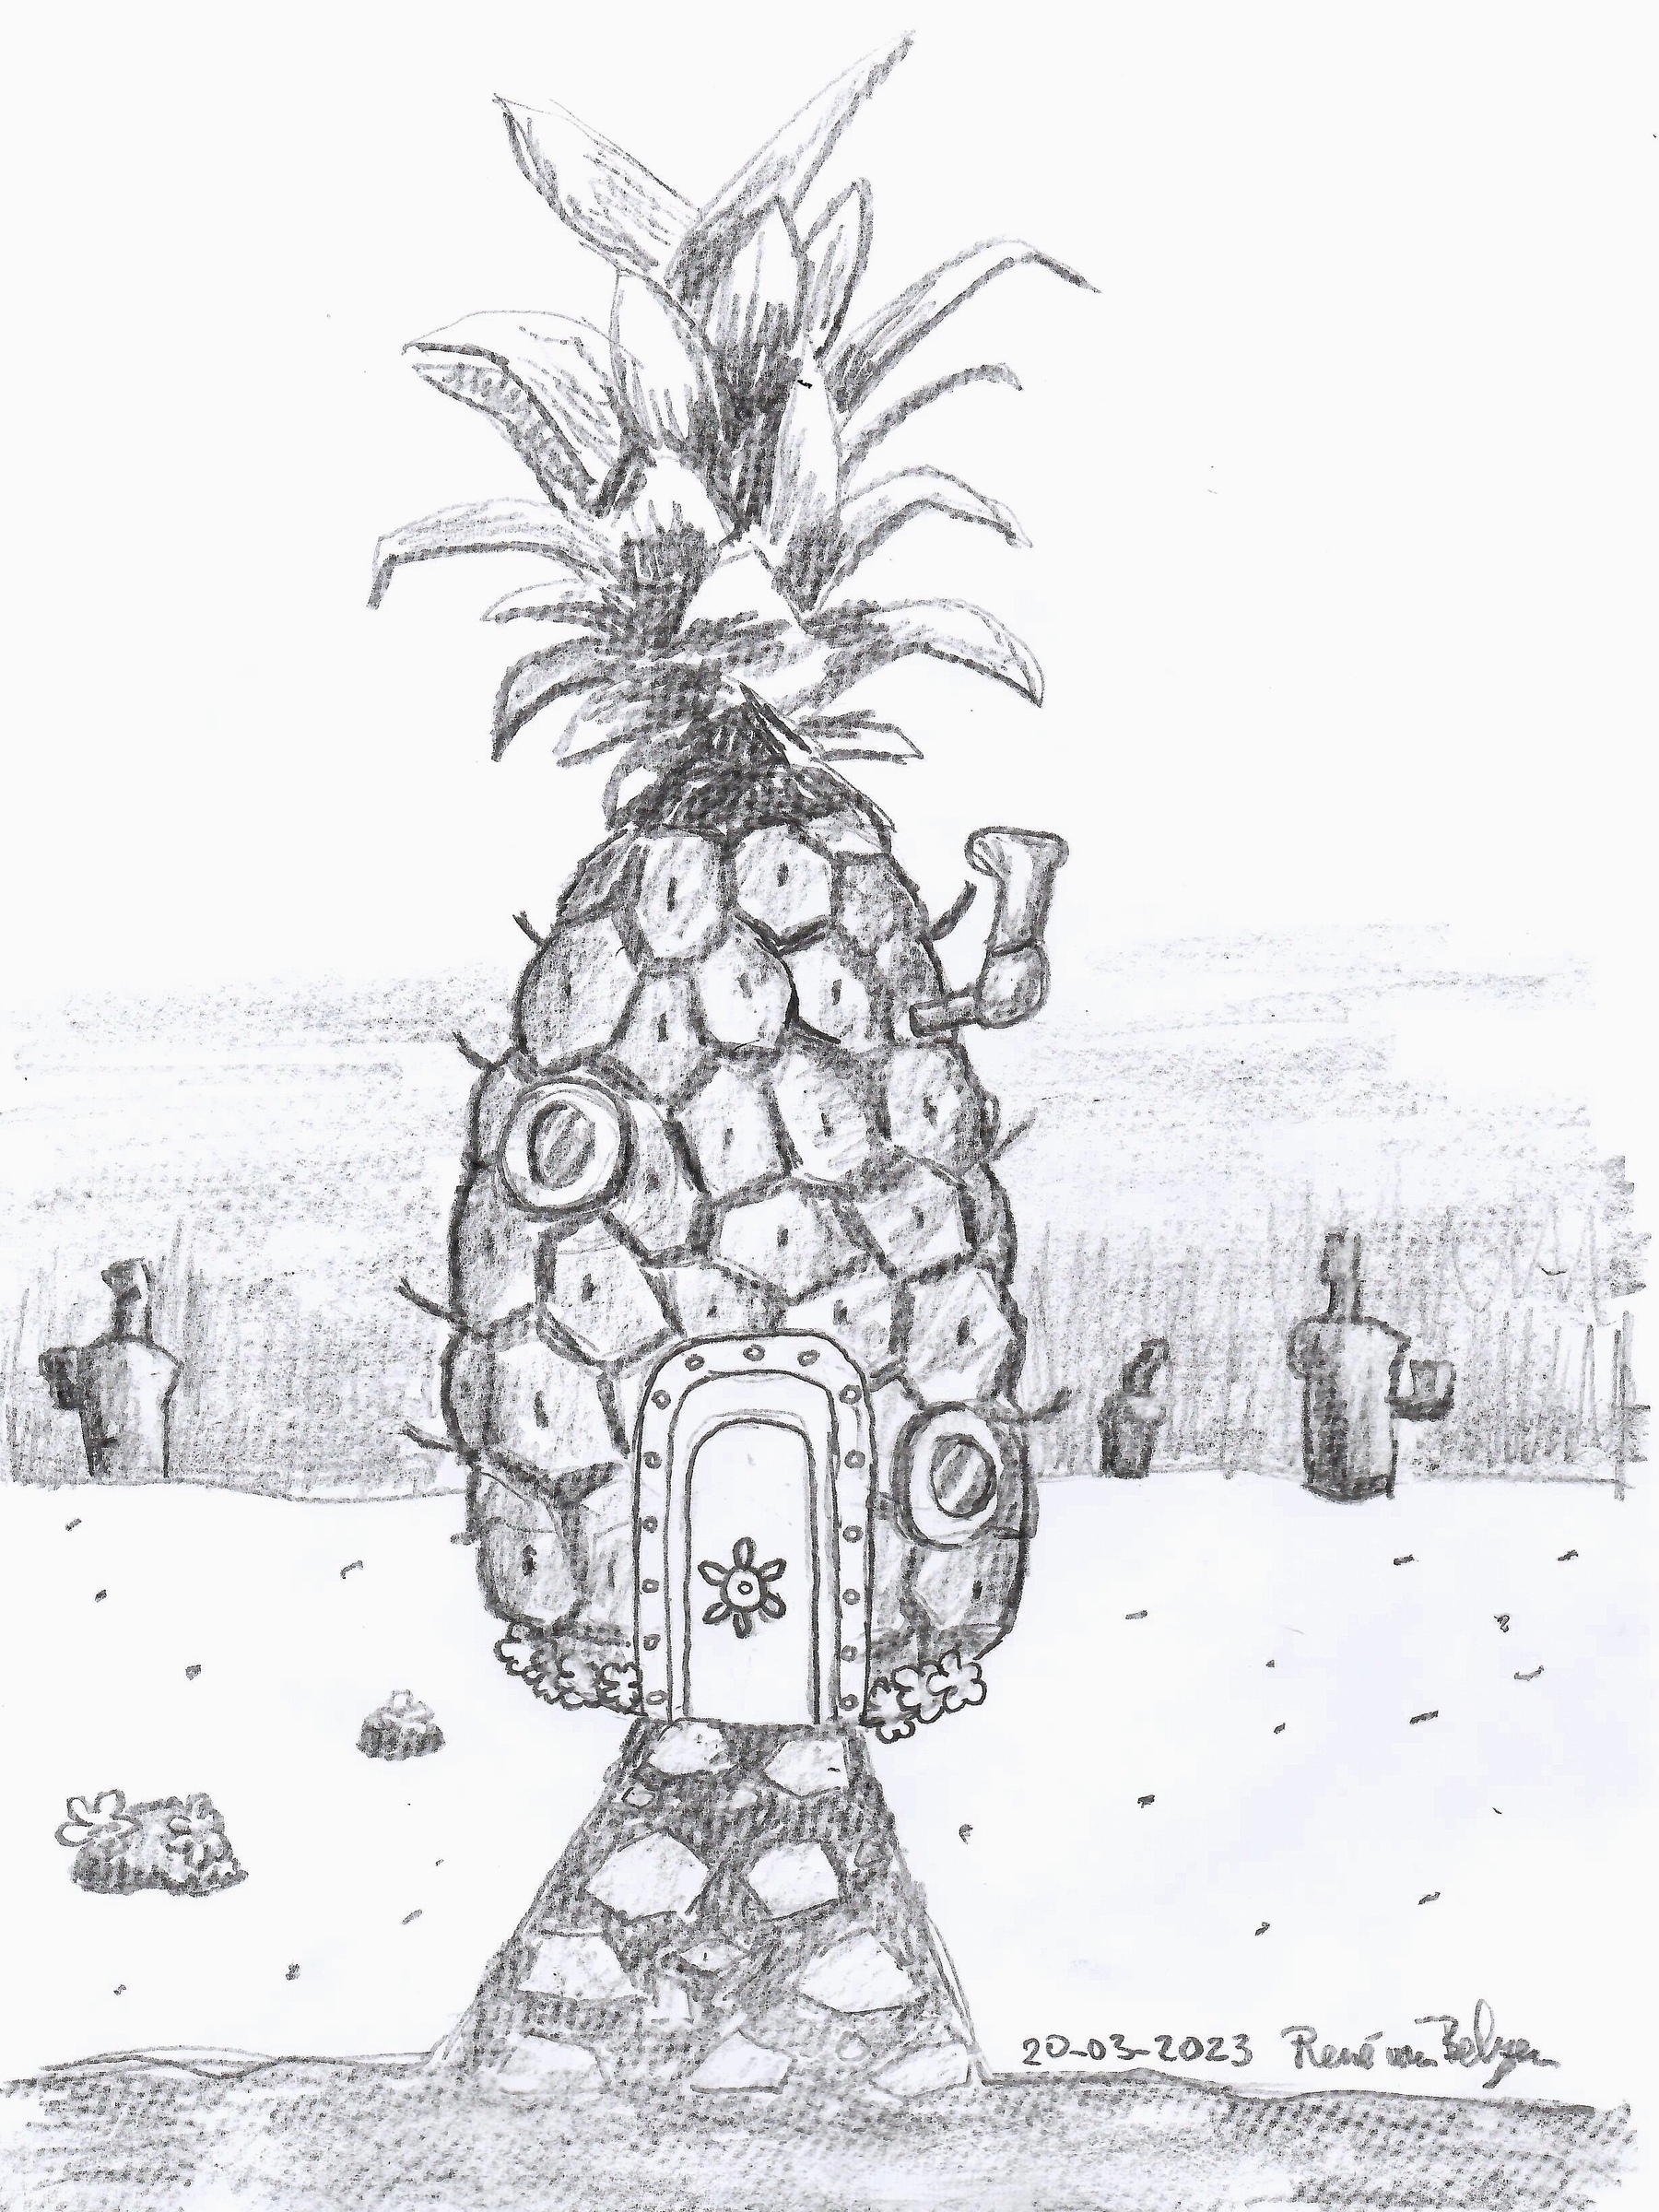 pencil sketch of a pineapple under the sea